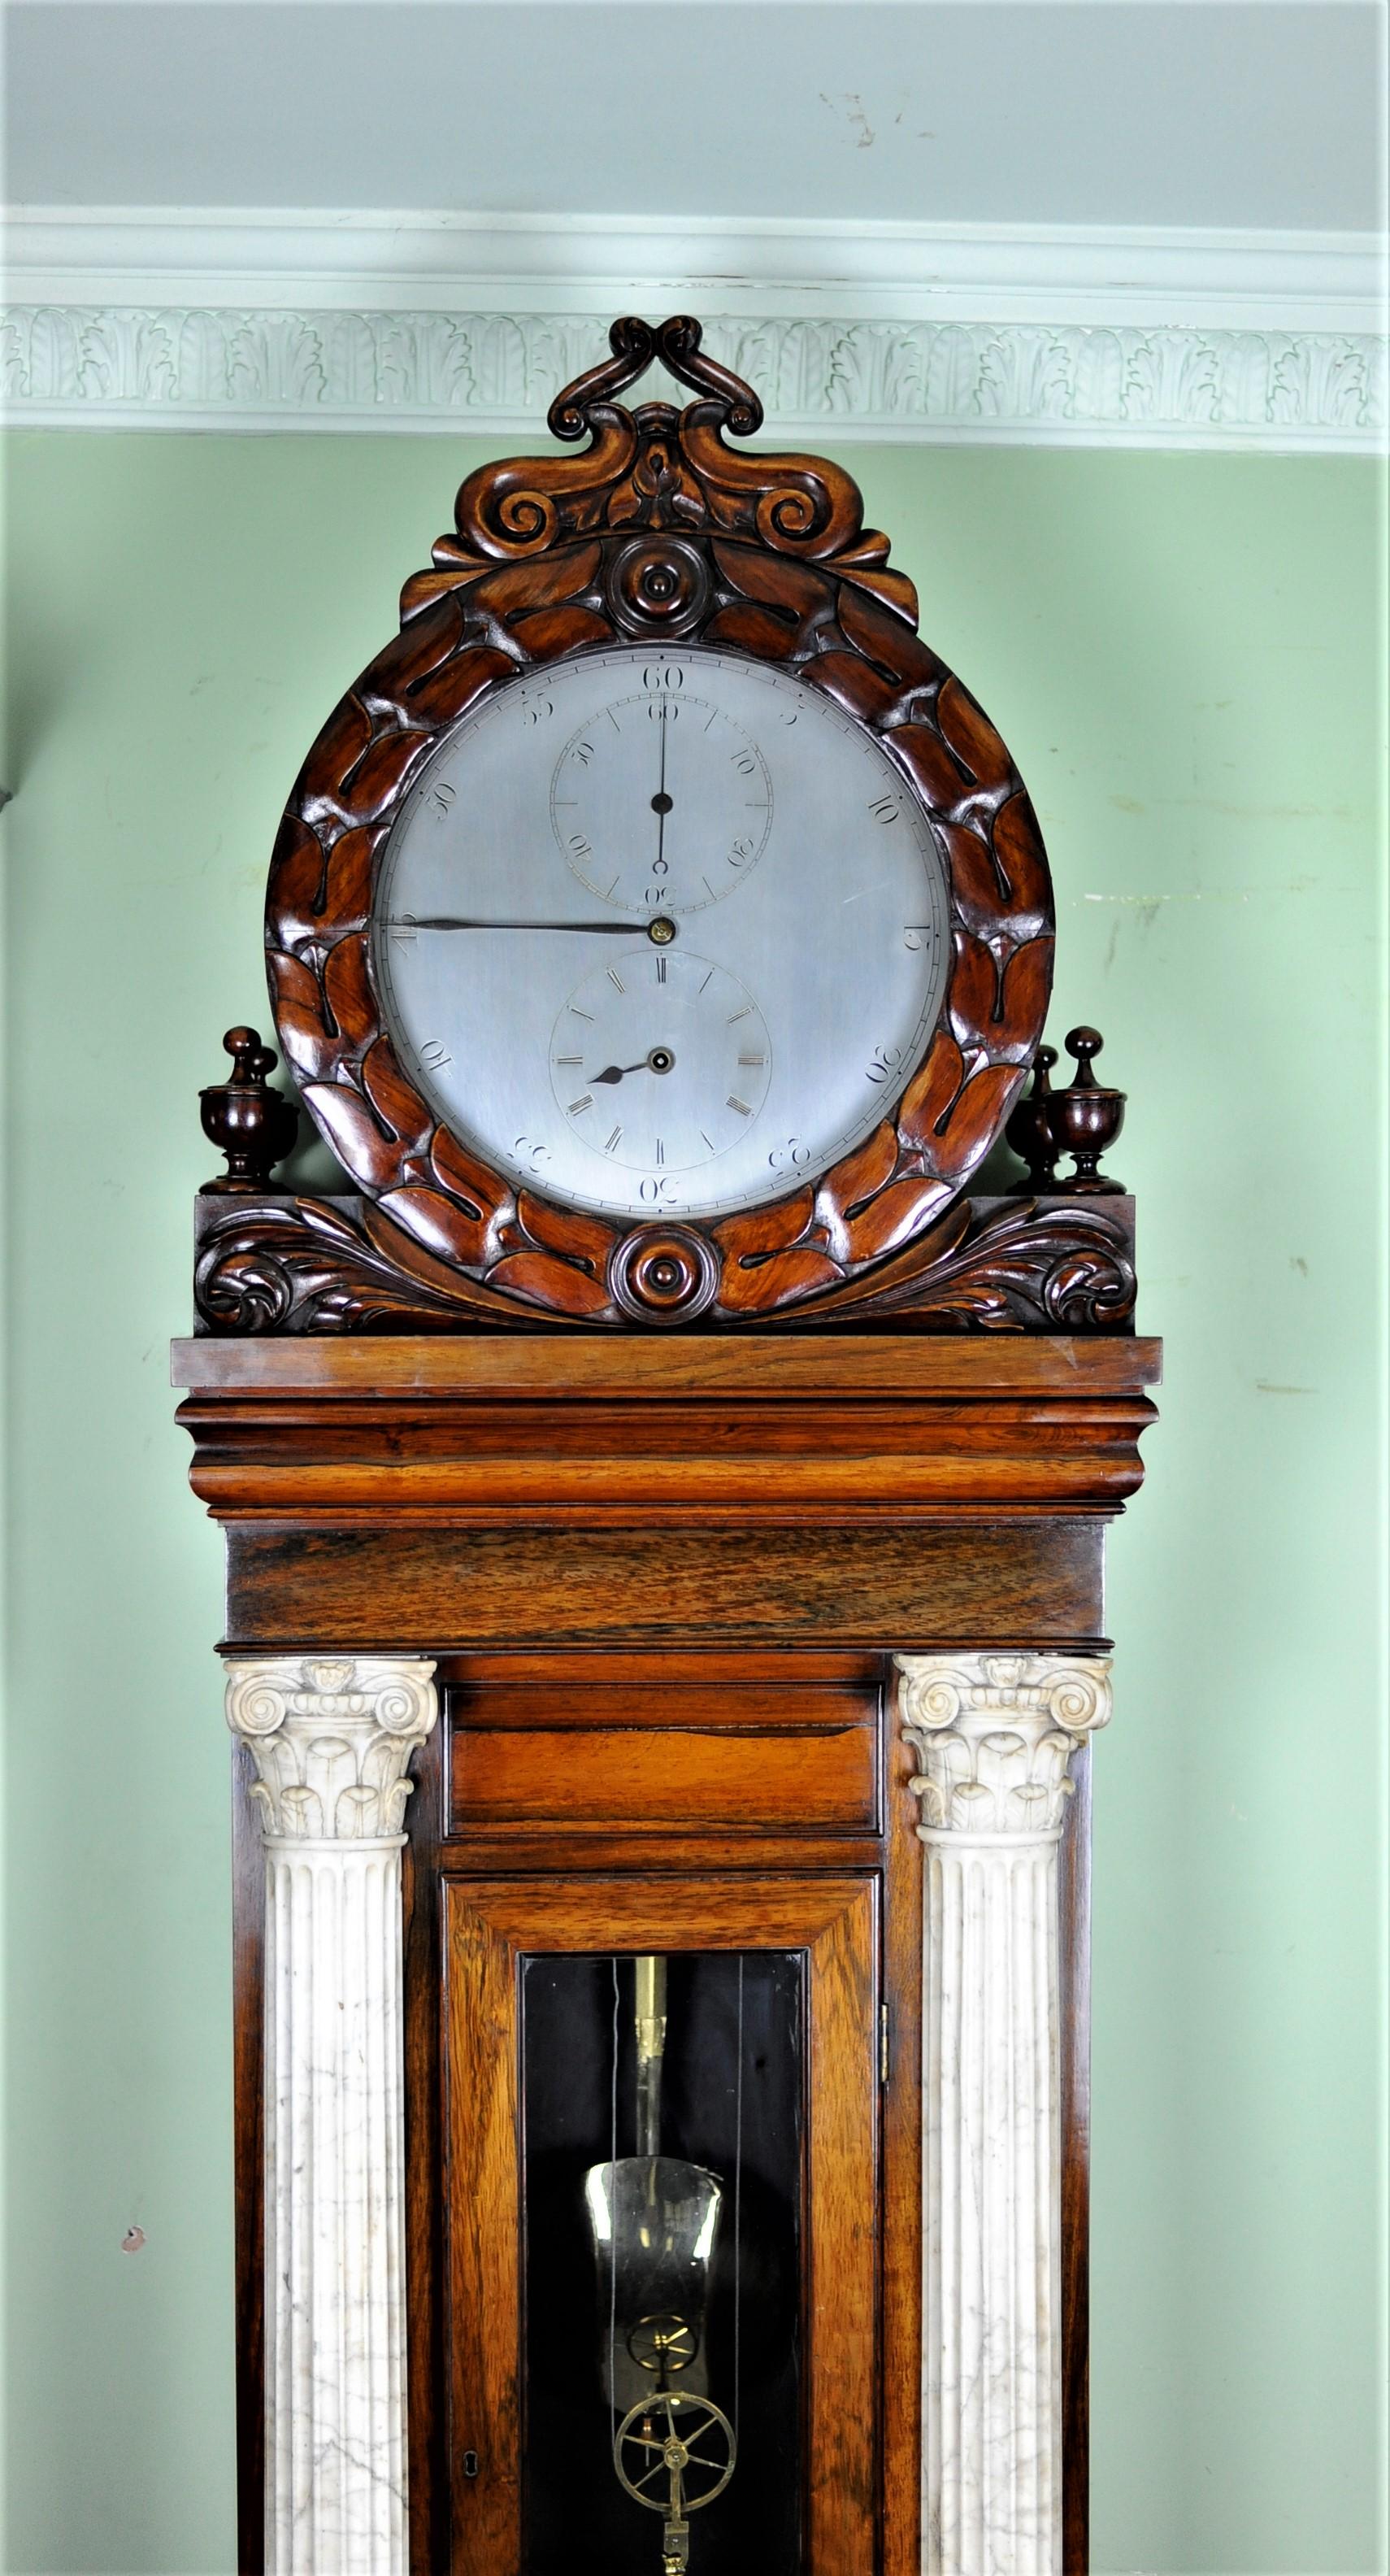 After 30 plus years being involved in clocks it is rare to see something totally unique that has not been seen before - this is certainly such a clock!
This magnificent item is made to the highest possible standards using Rosewood veneers only ever